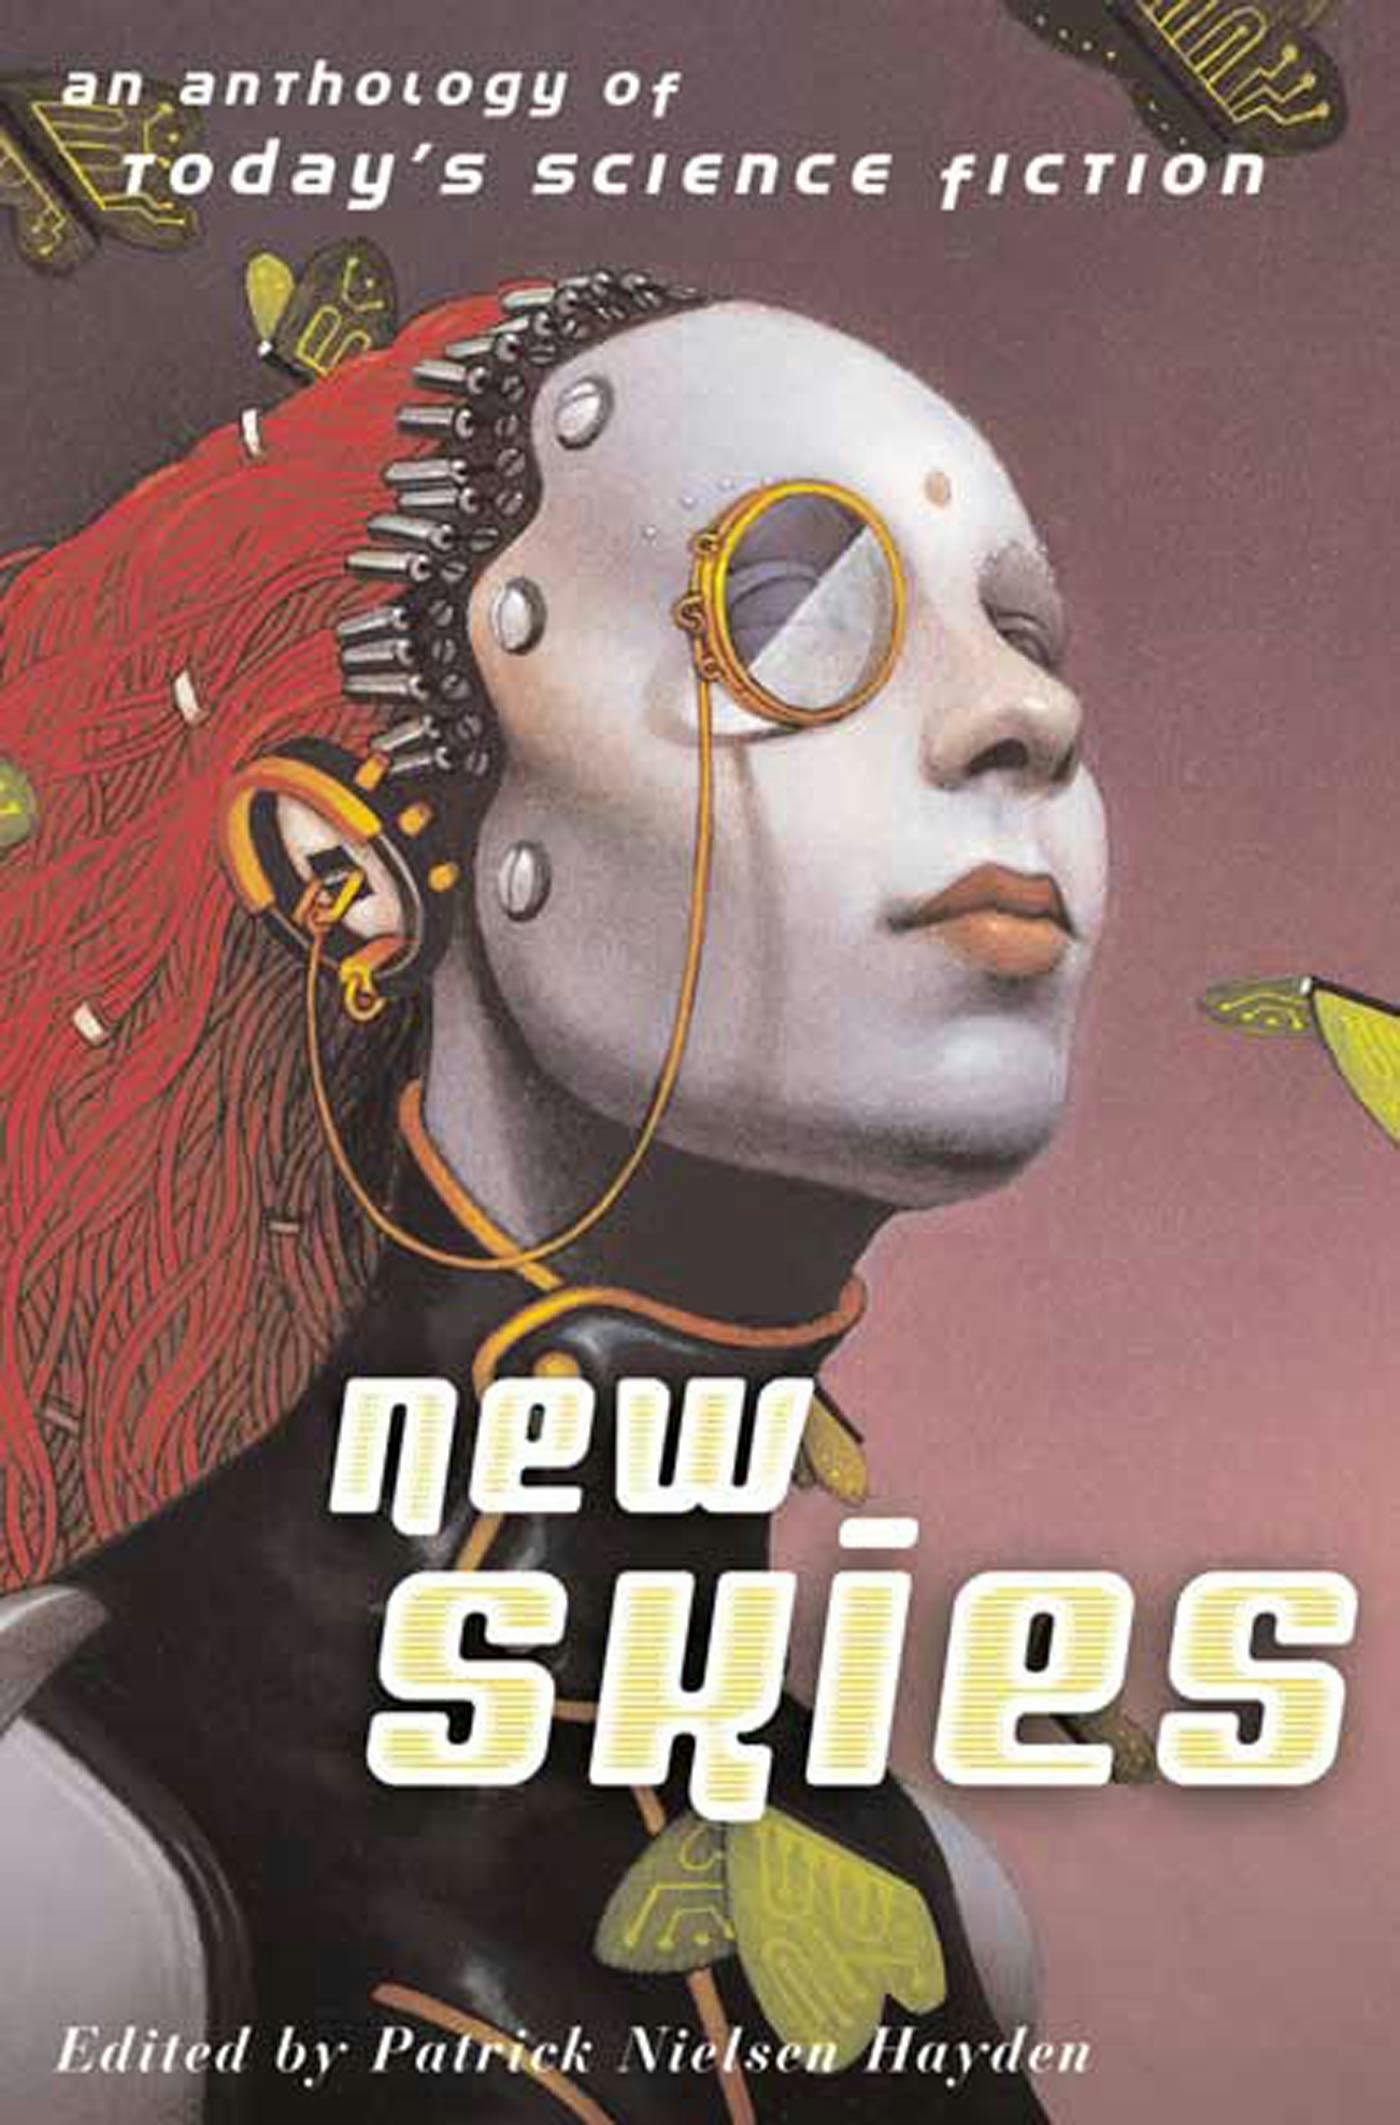 Cover for the book titled as: New Skies